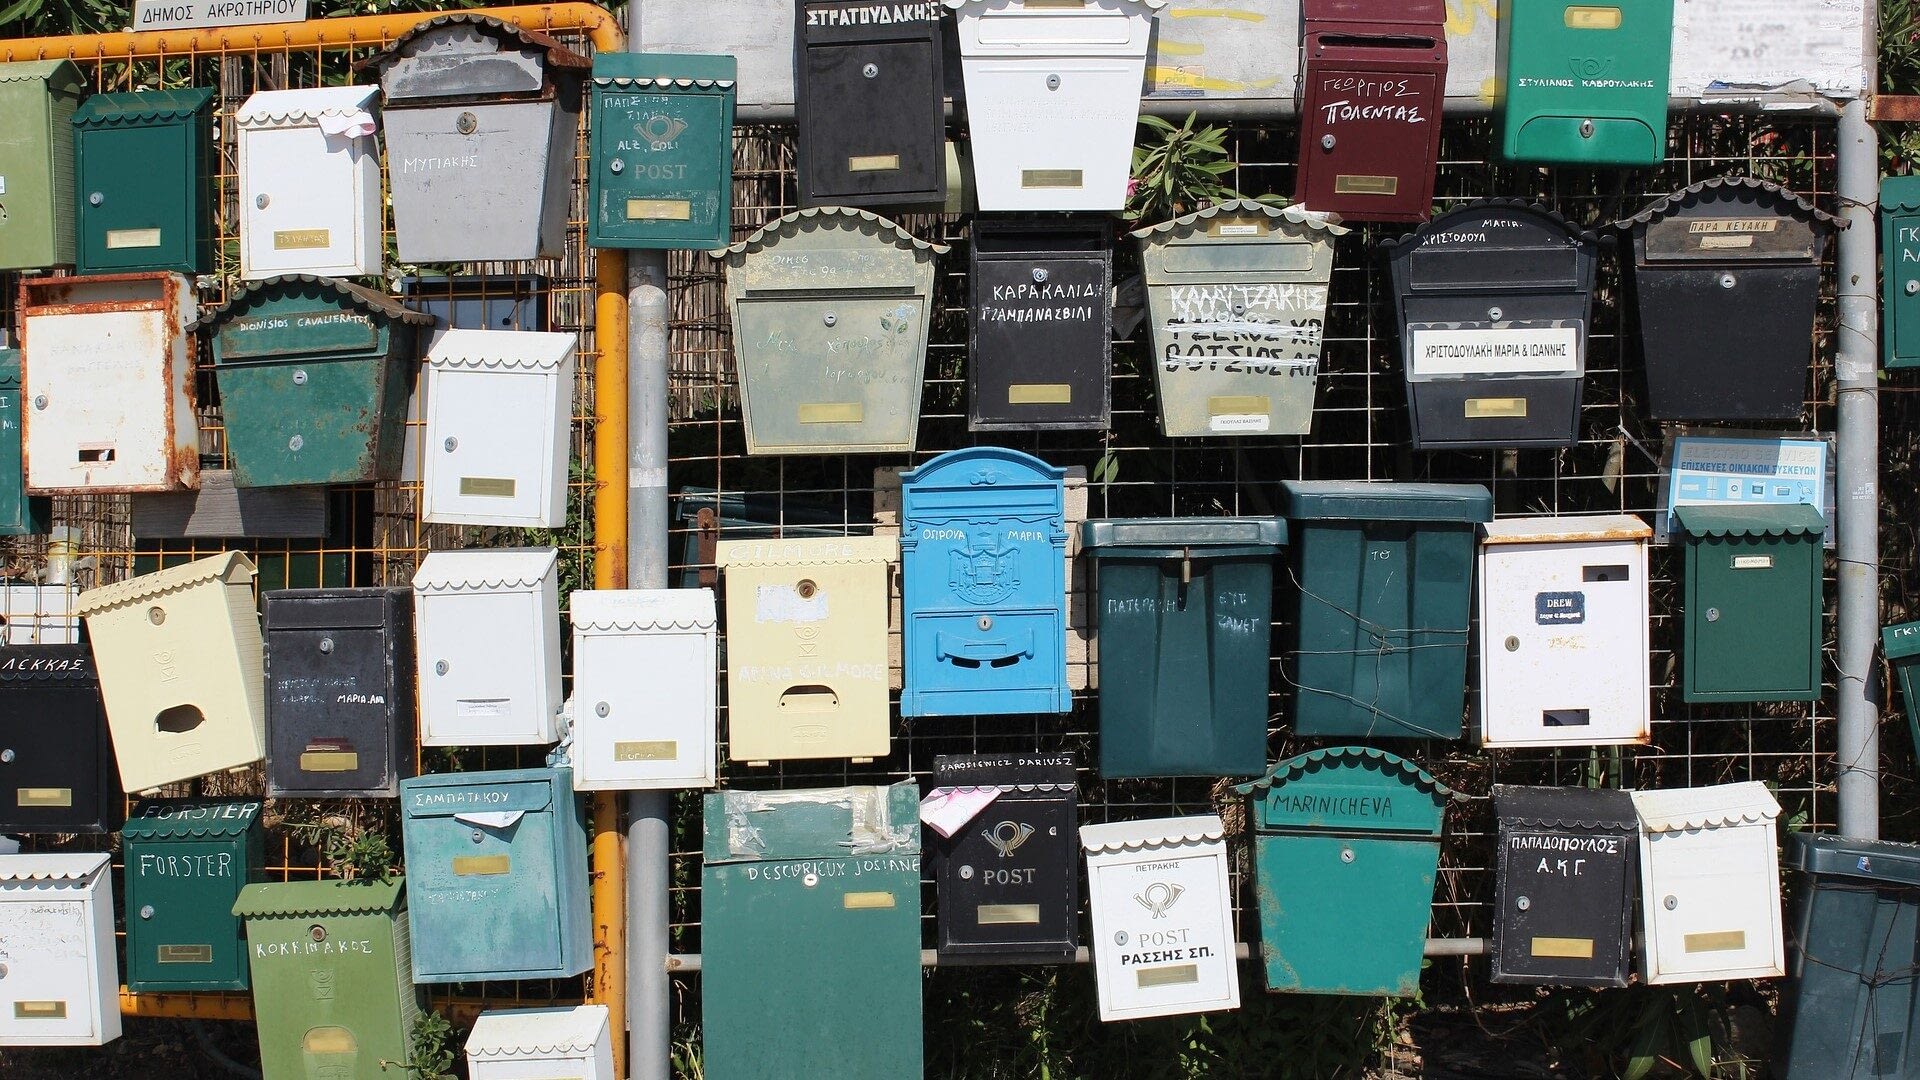 Image: a collection of various mailboxes to collect letters